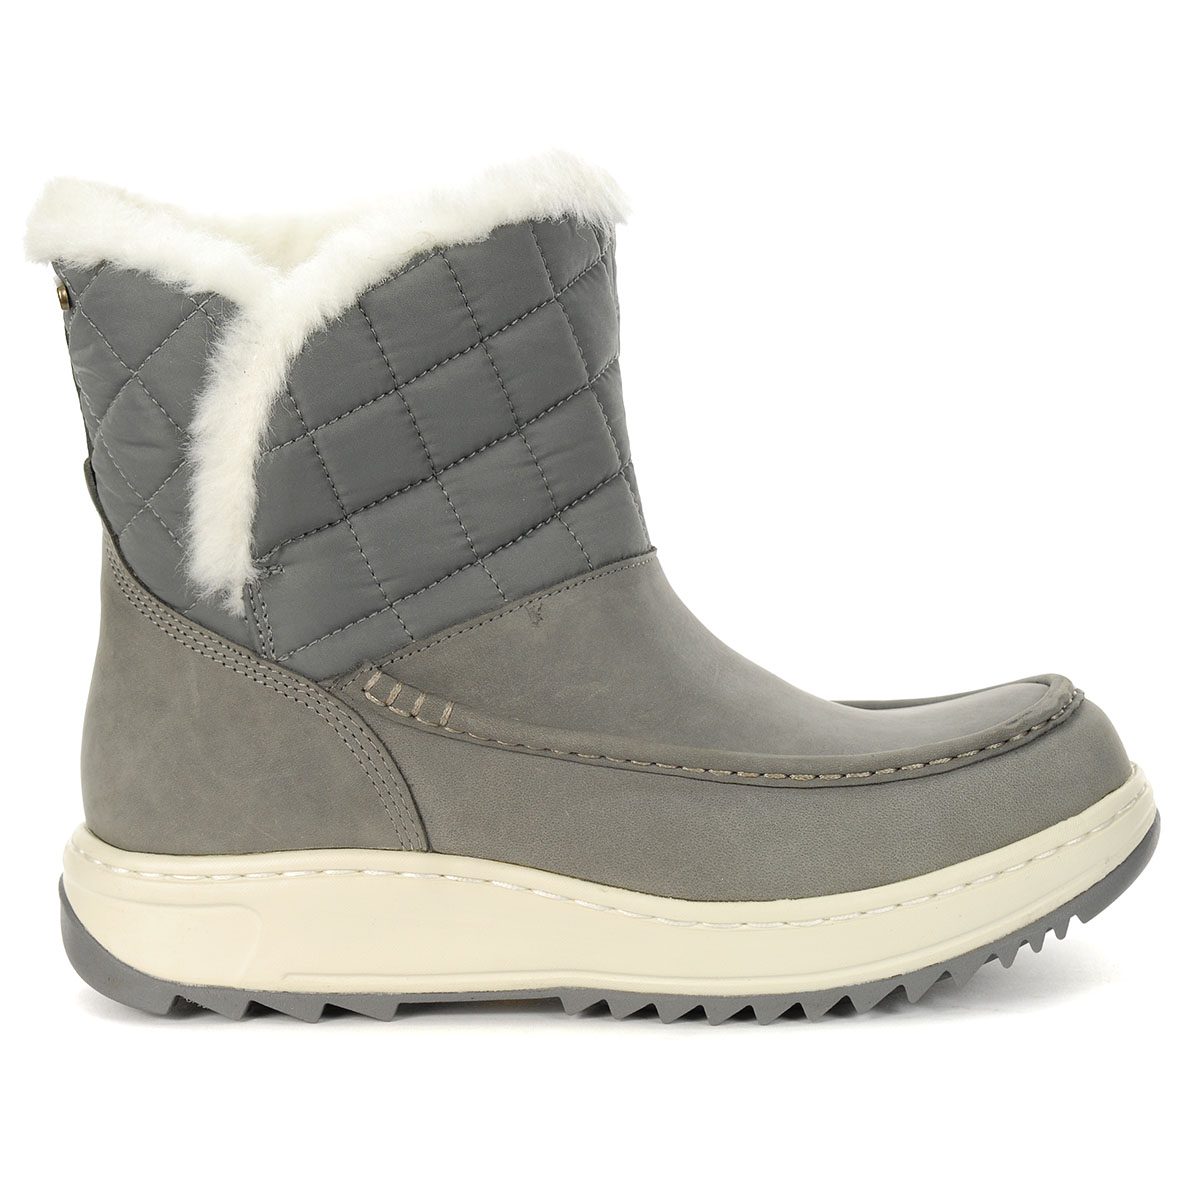 Sperry Top-Sider Women's Powder Altona Quilted Grey Winter Boots ...